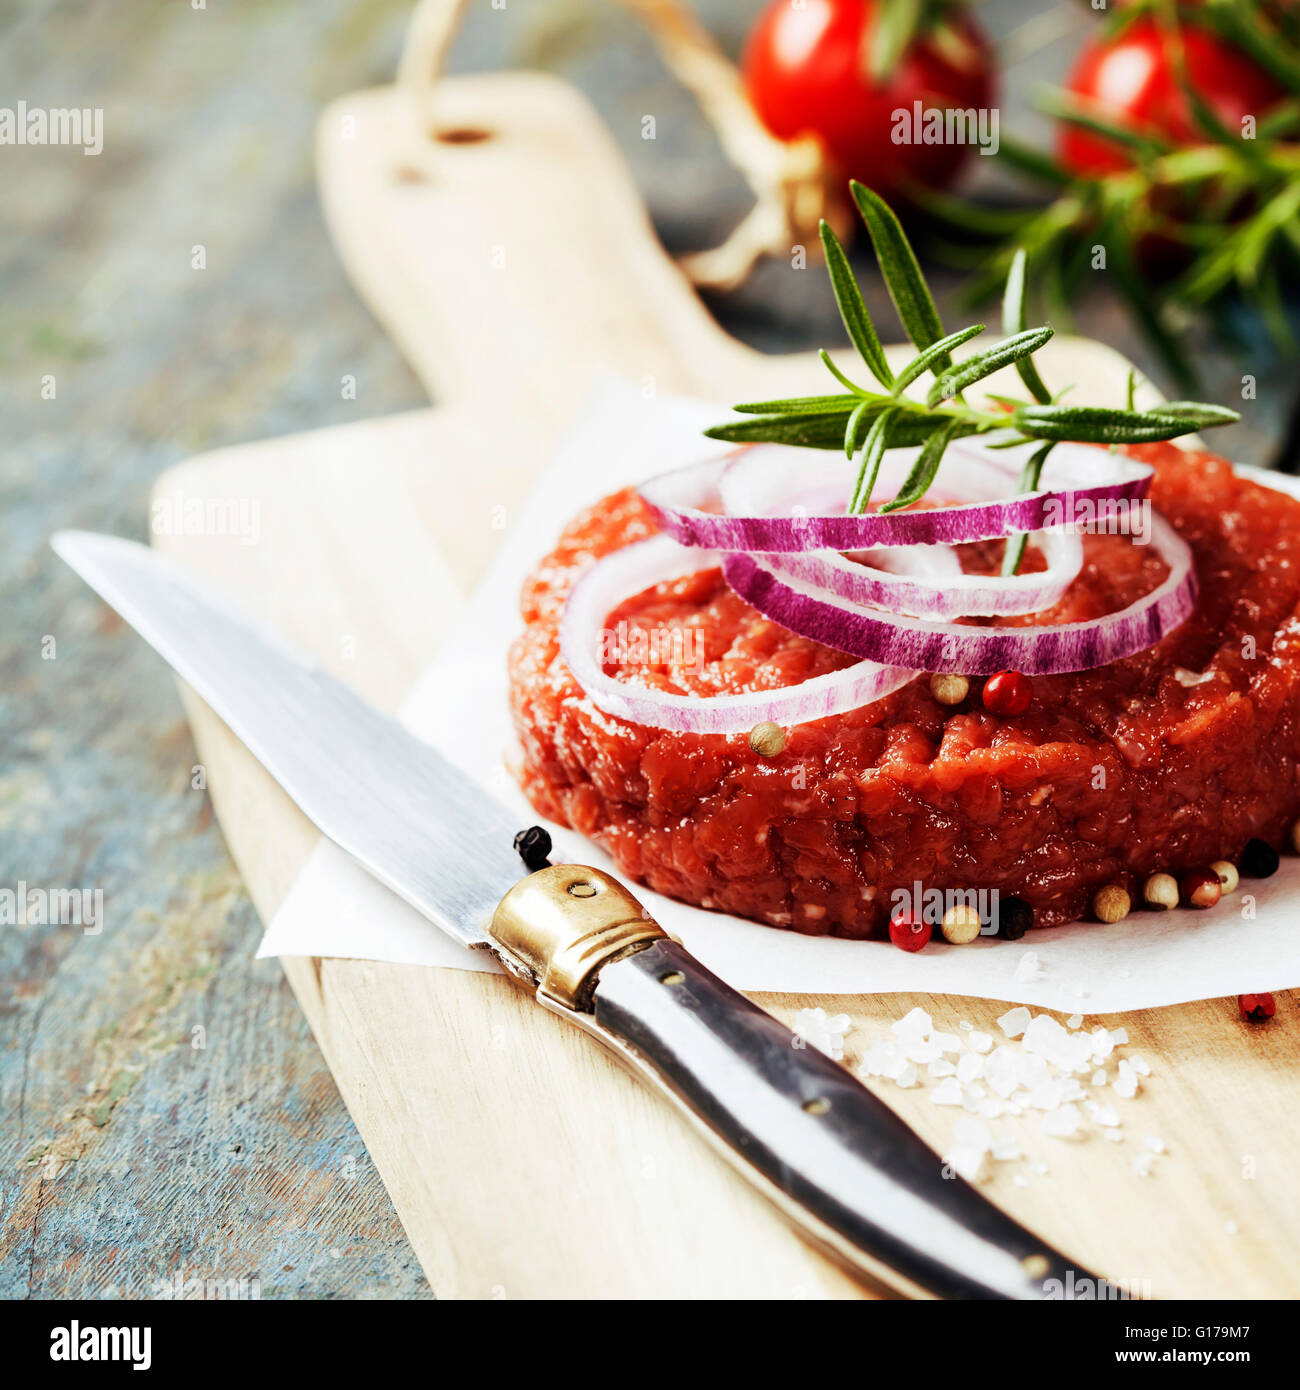 Raw Ground beef meat Burger steak cutlet with seasoning on vintage wooden boards Stock Photo